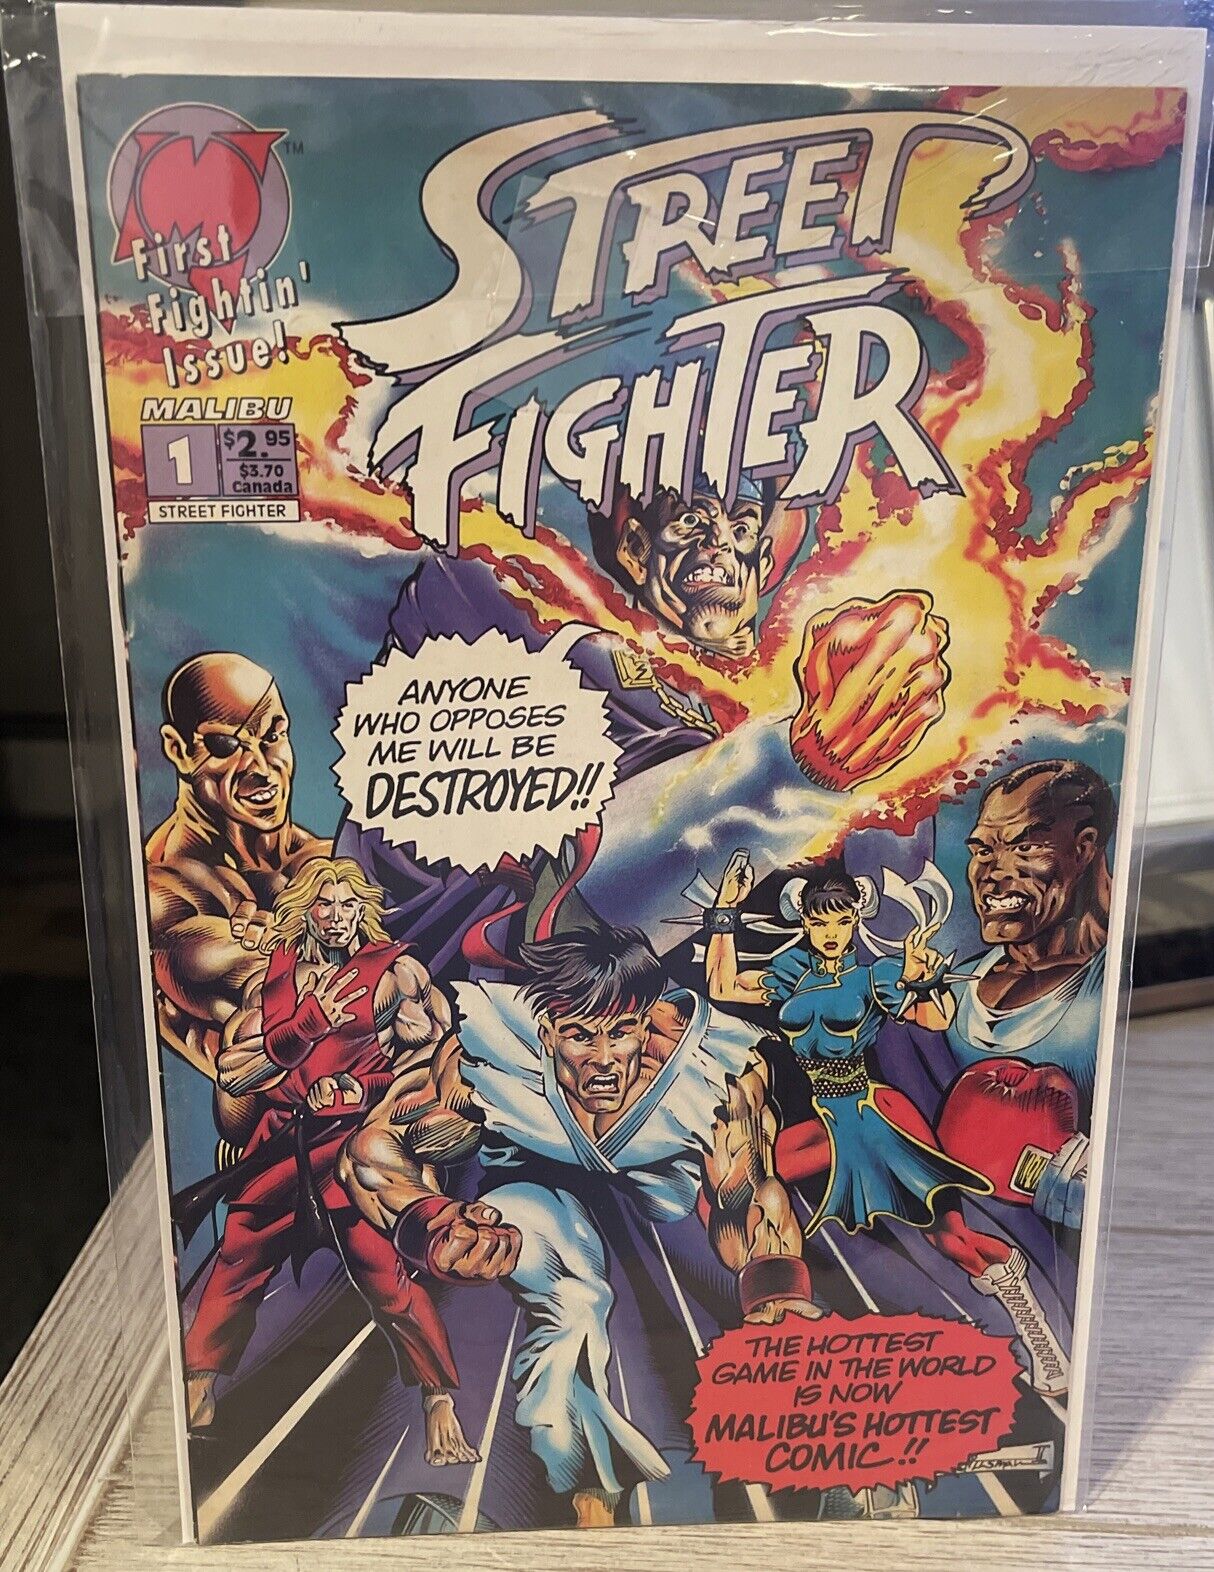 Street Fighter #1 (Aircel Comics, August 1993)